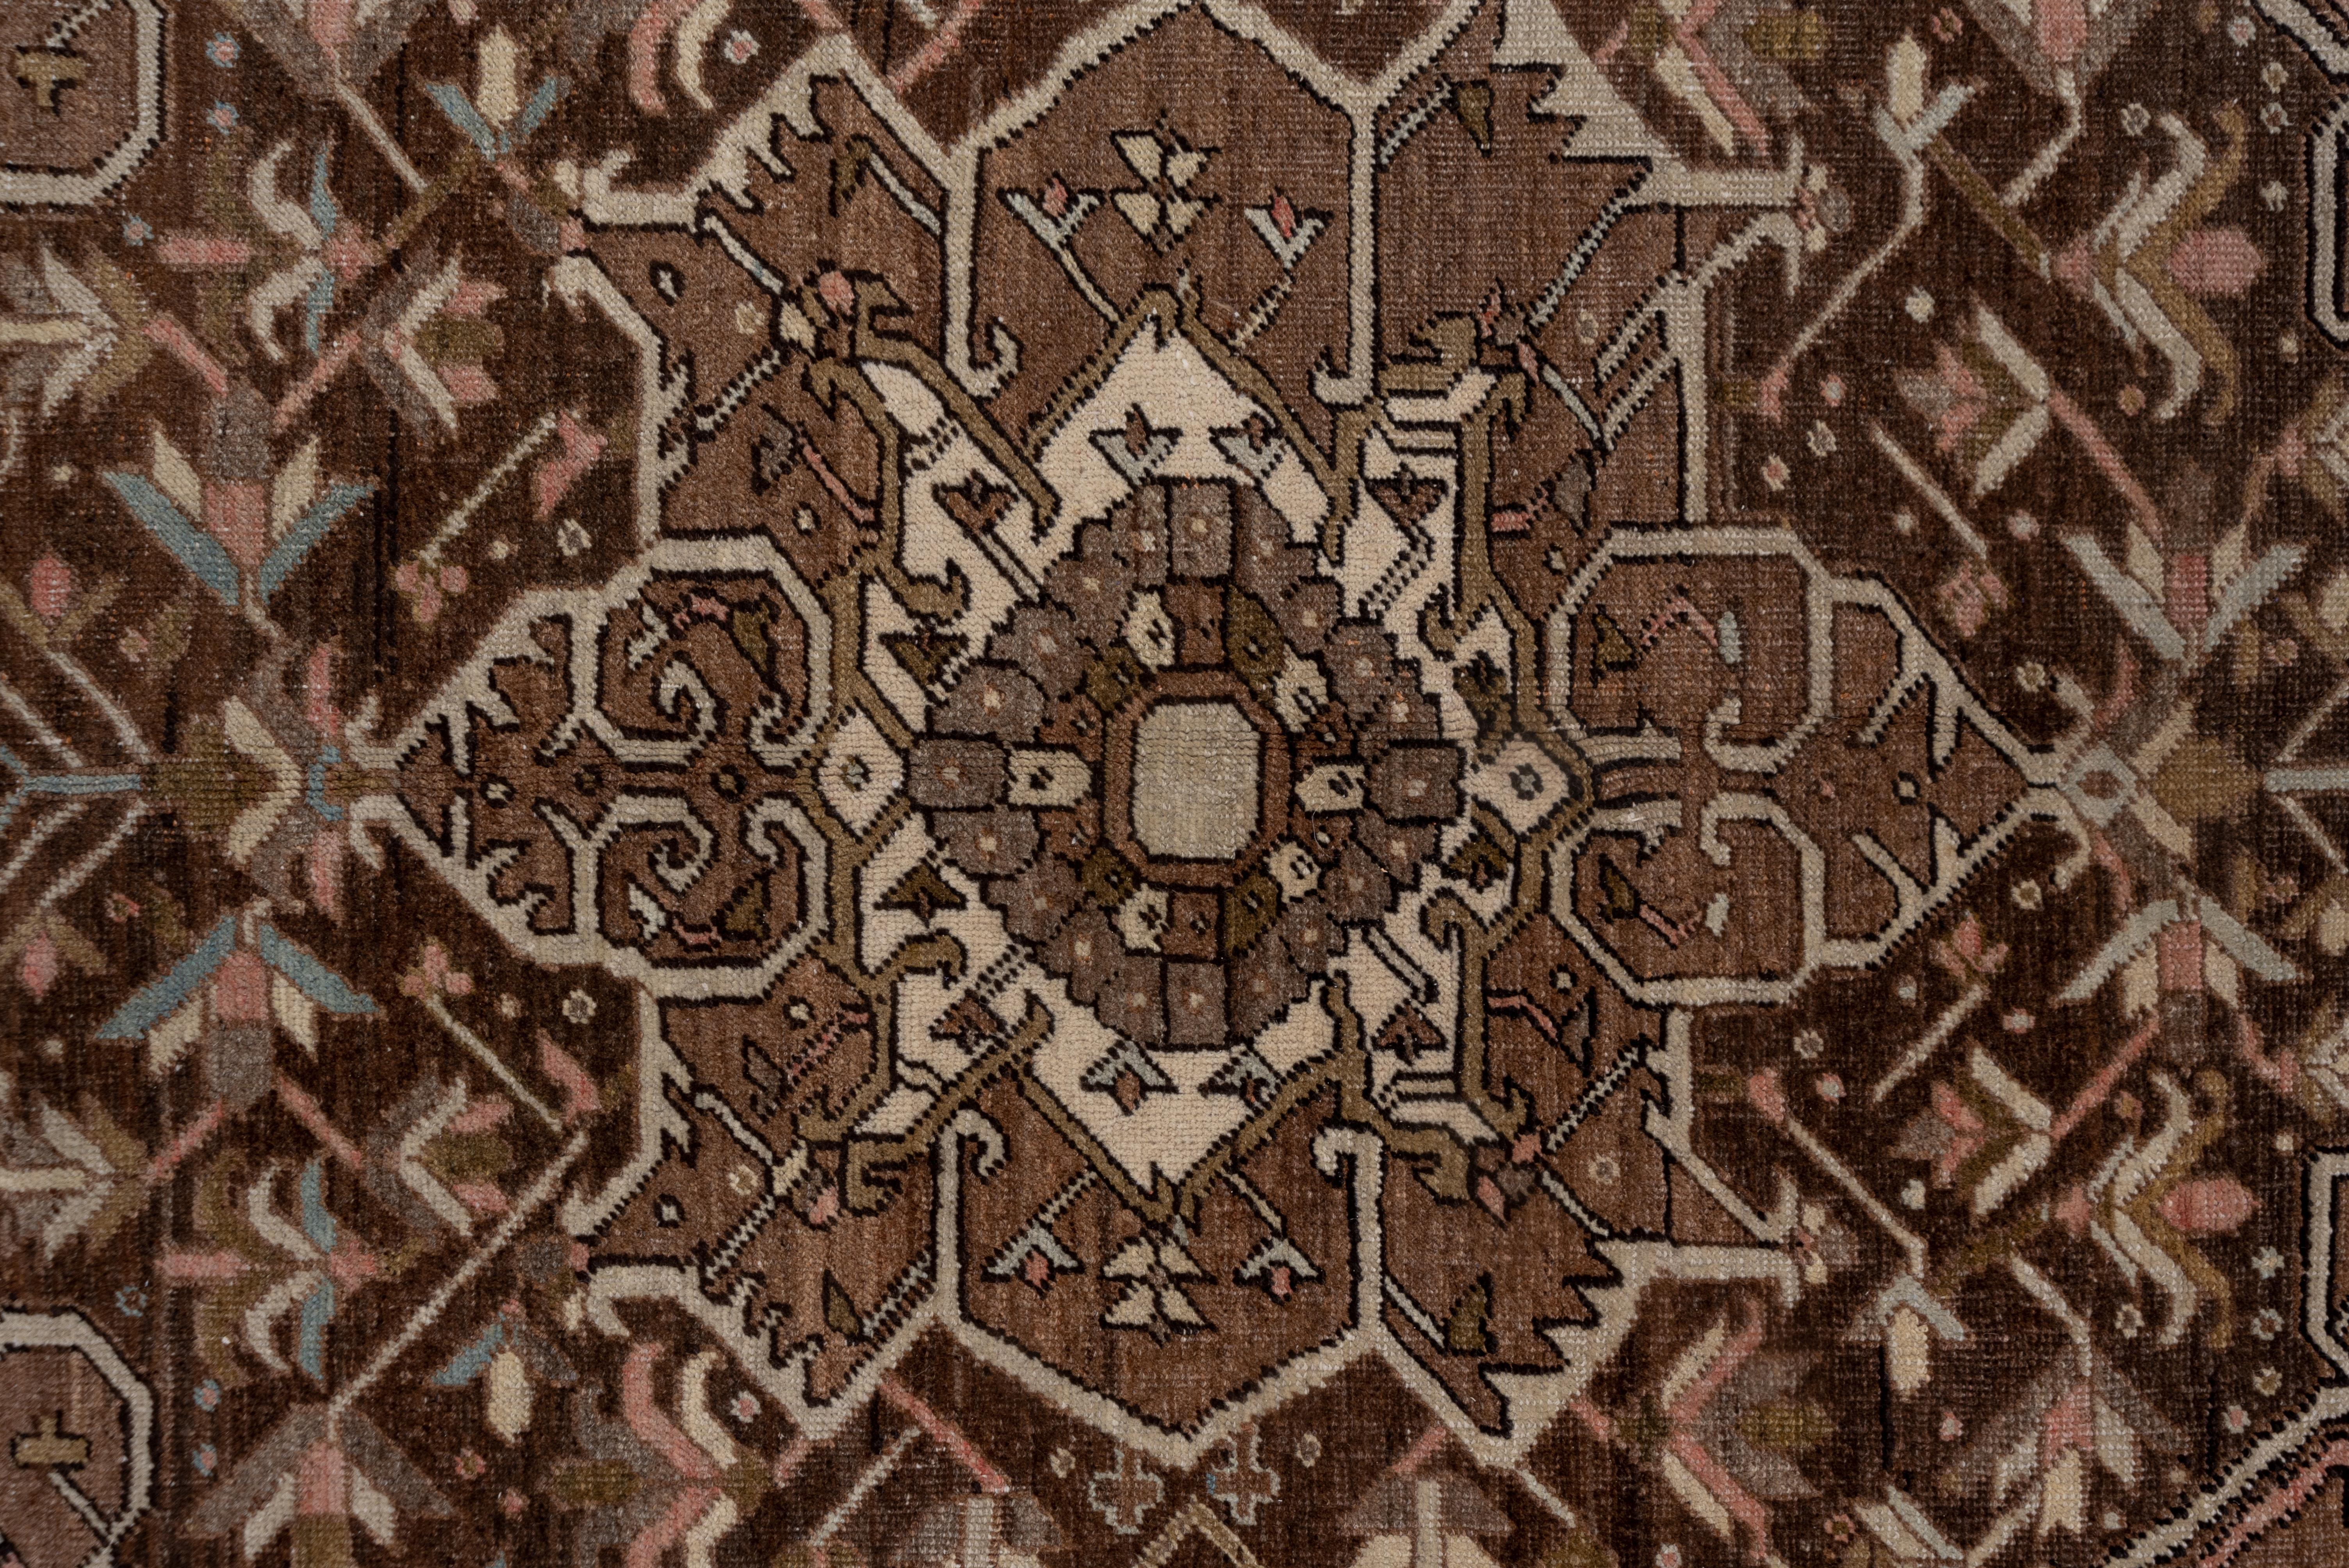 This carpet has a bold brick oval medallion and four spearpoint pendants in the cardinal directions on a soft coral subfield, which, in turn, is set on a sand field with abstract palmette corner motives and long serrated, straight leaves. The